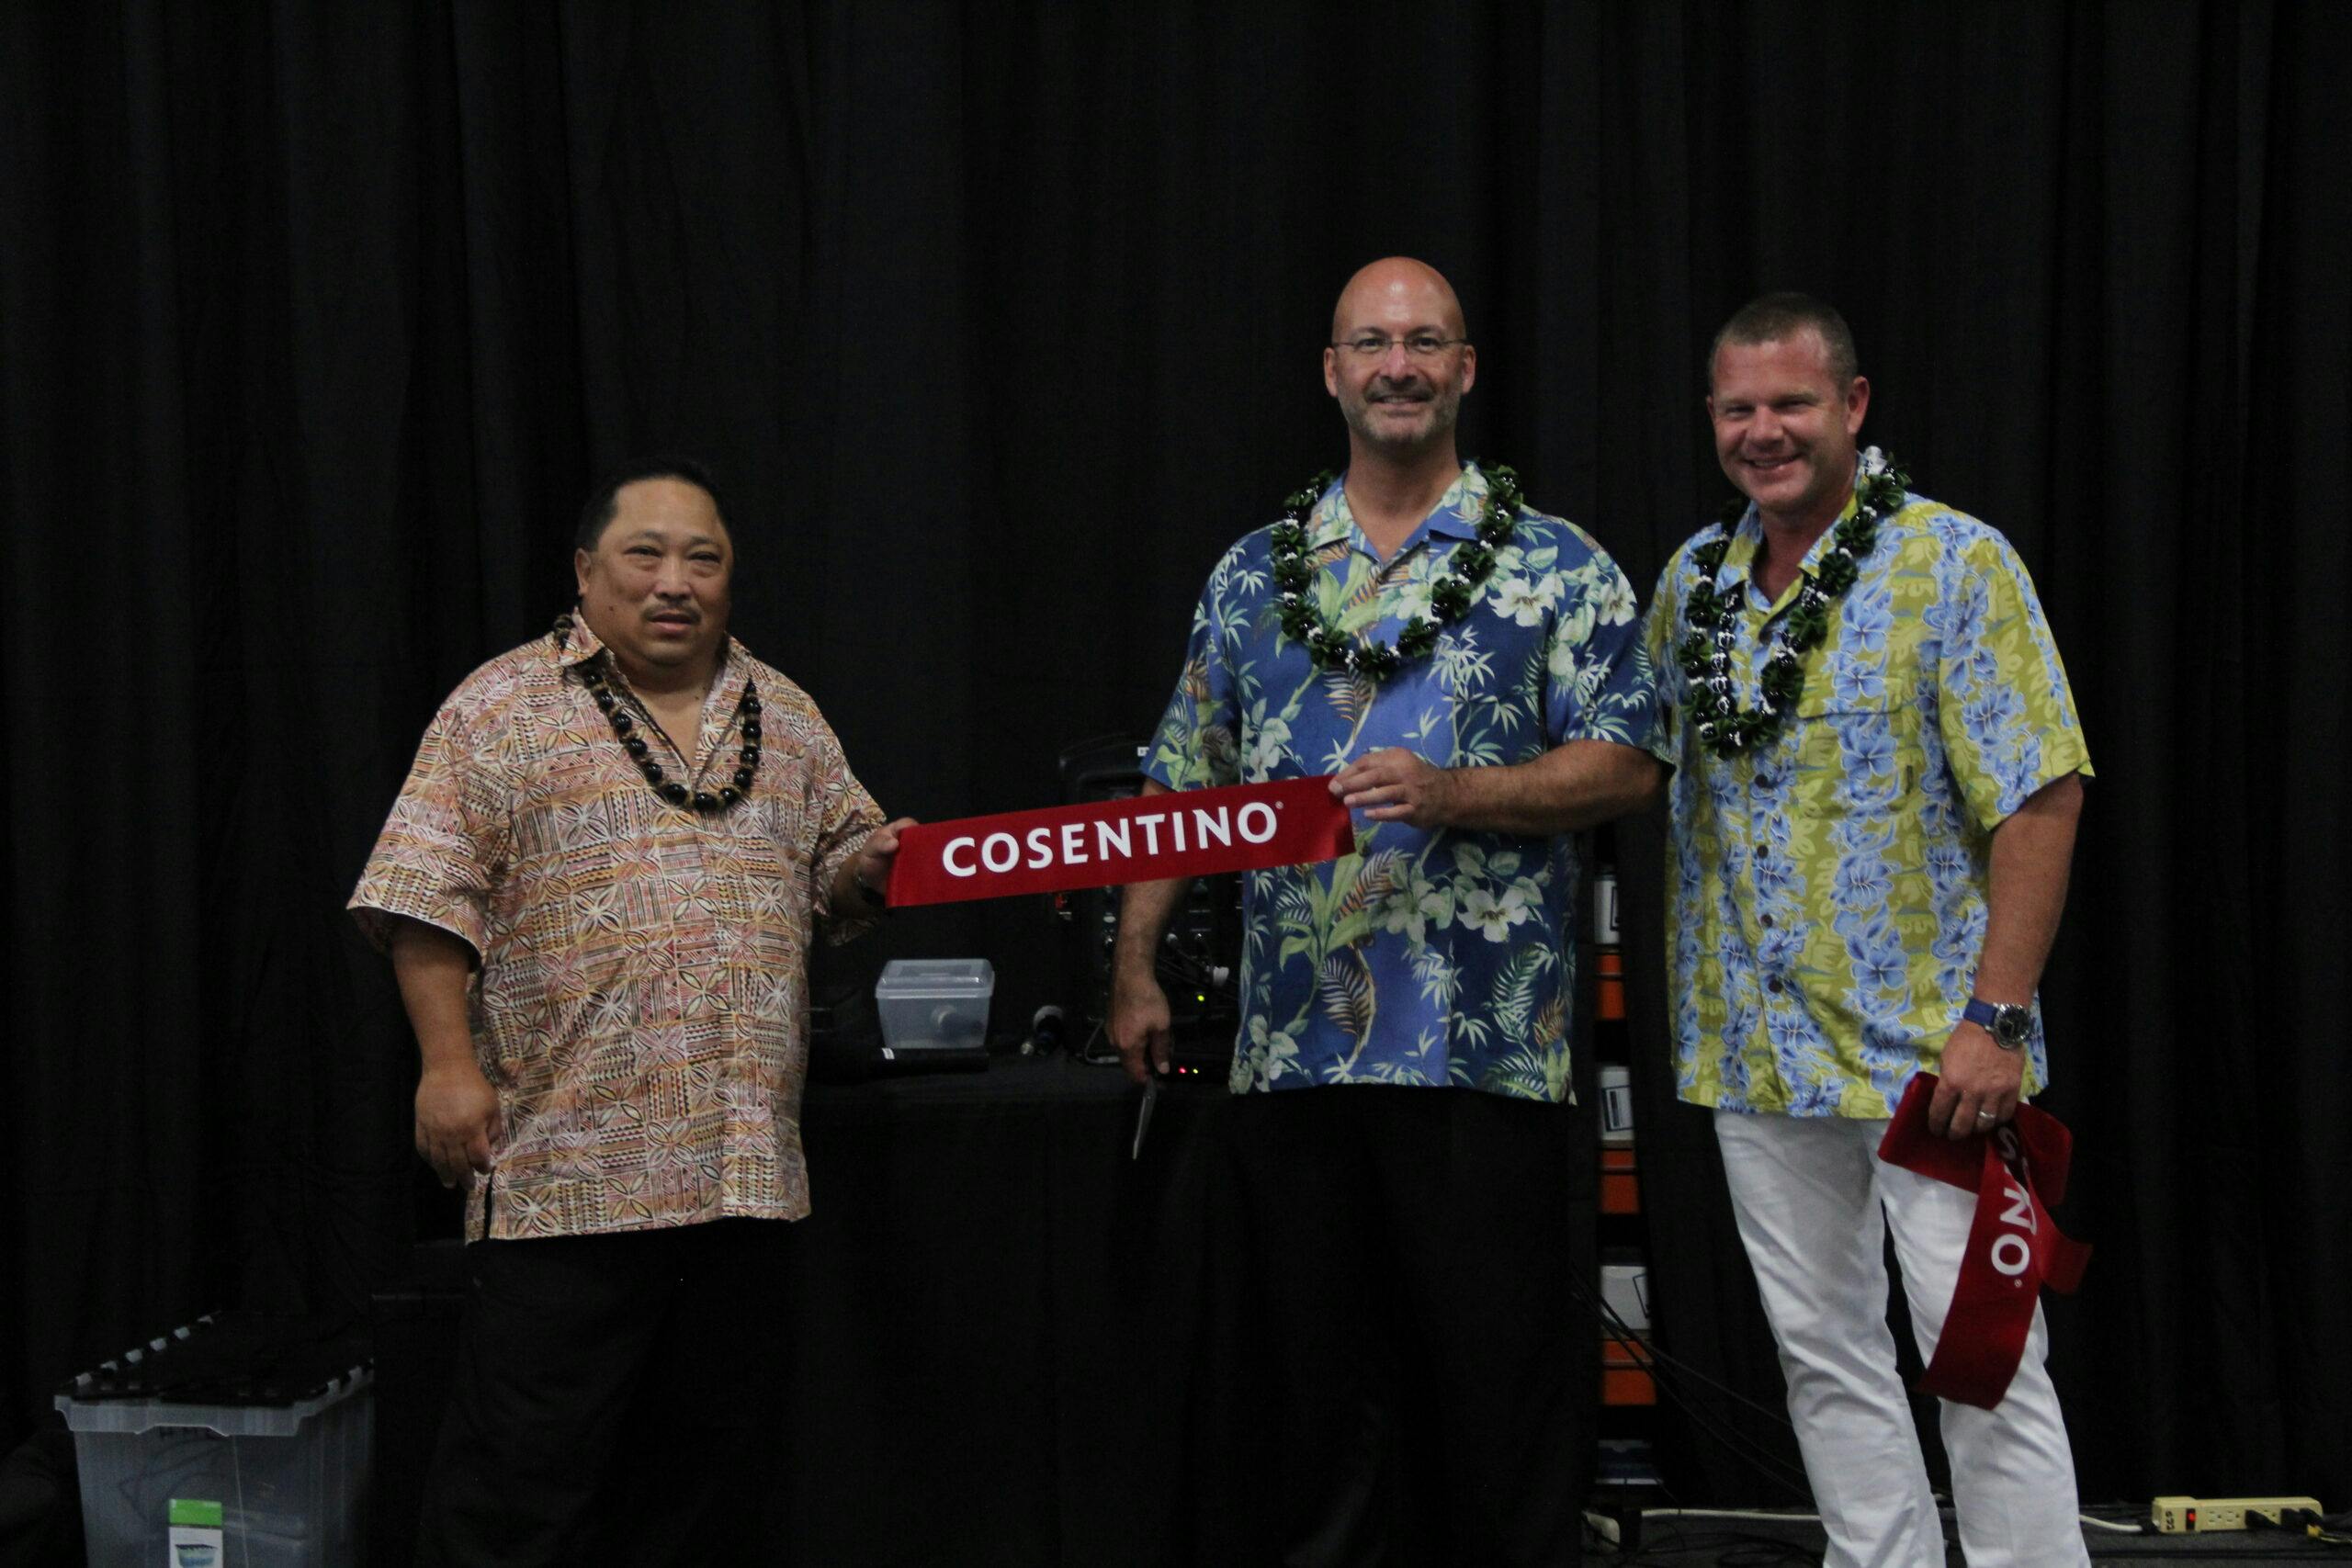 Image 32 of 2018 07 12 06.23.04 5 scaled in Cosentino Opens First Hawaii Center in Honolulu - Cosentino